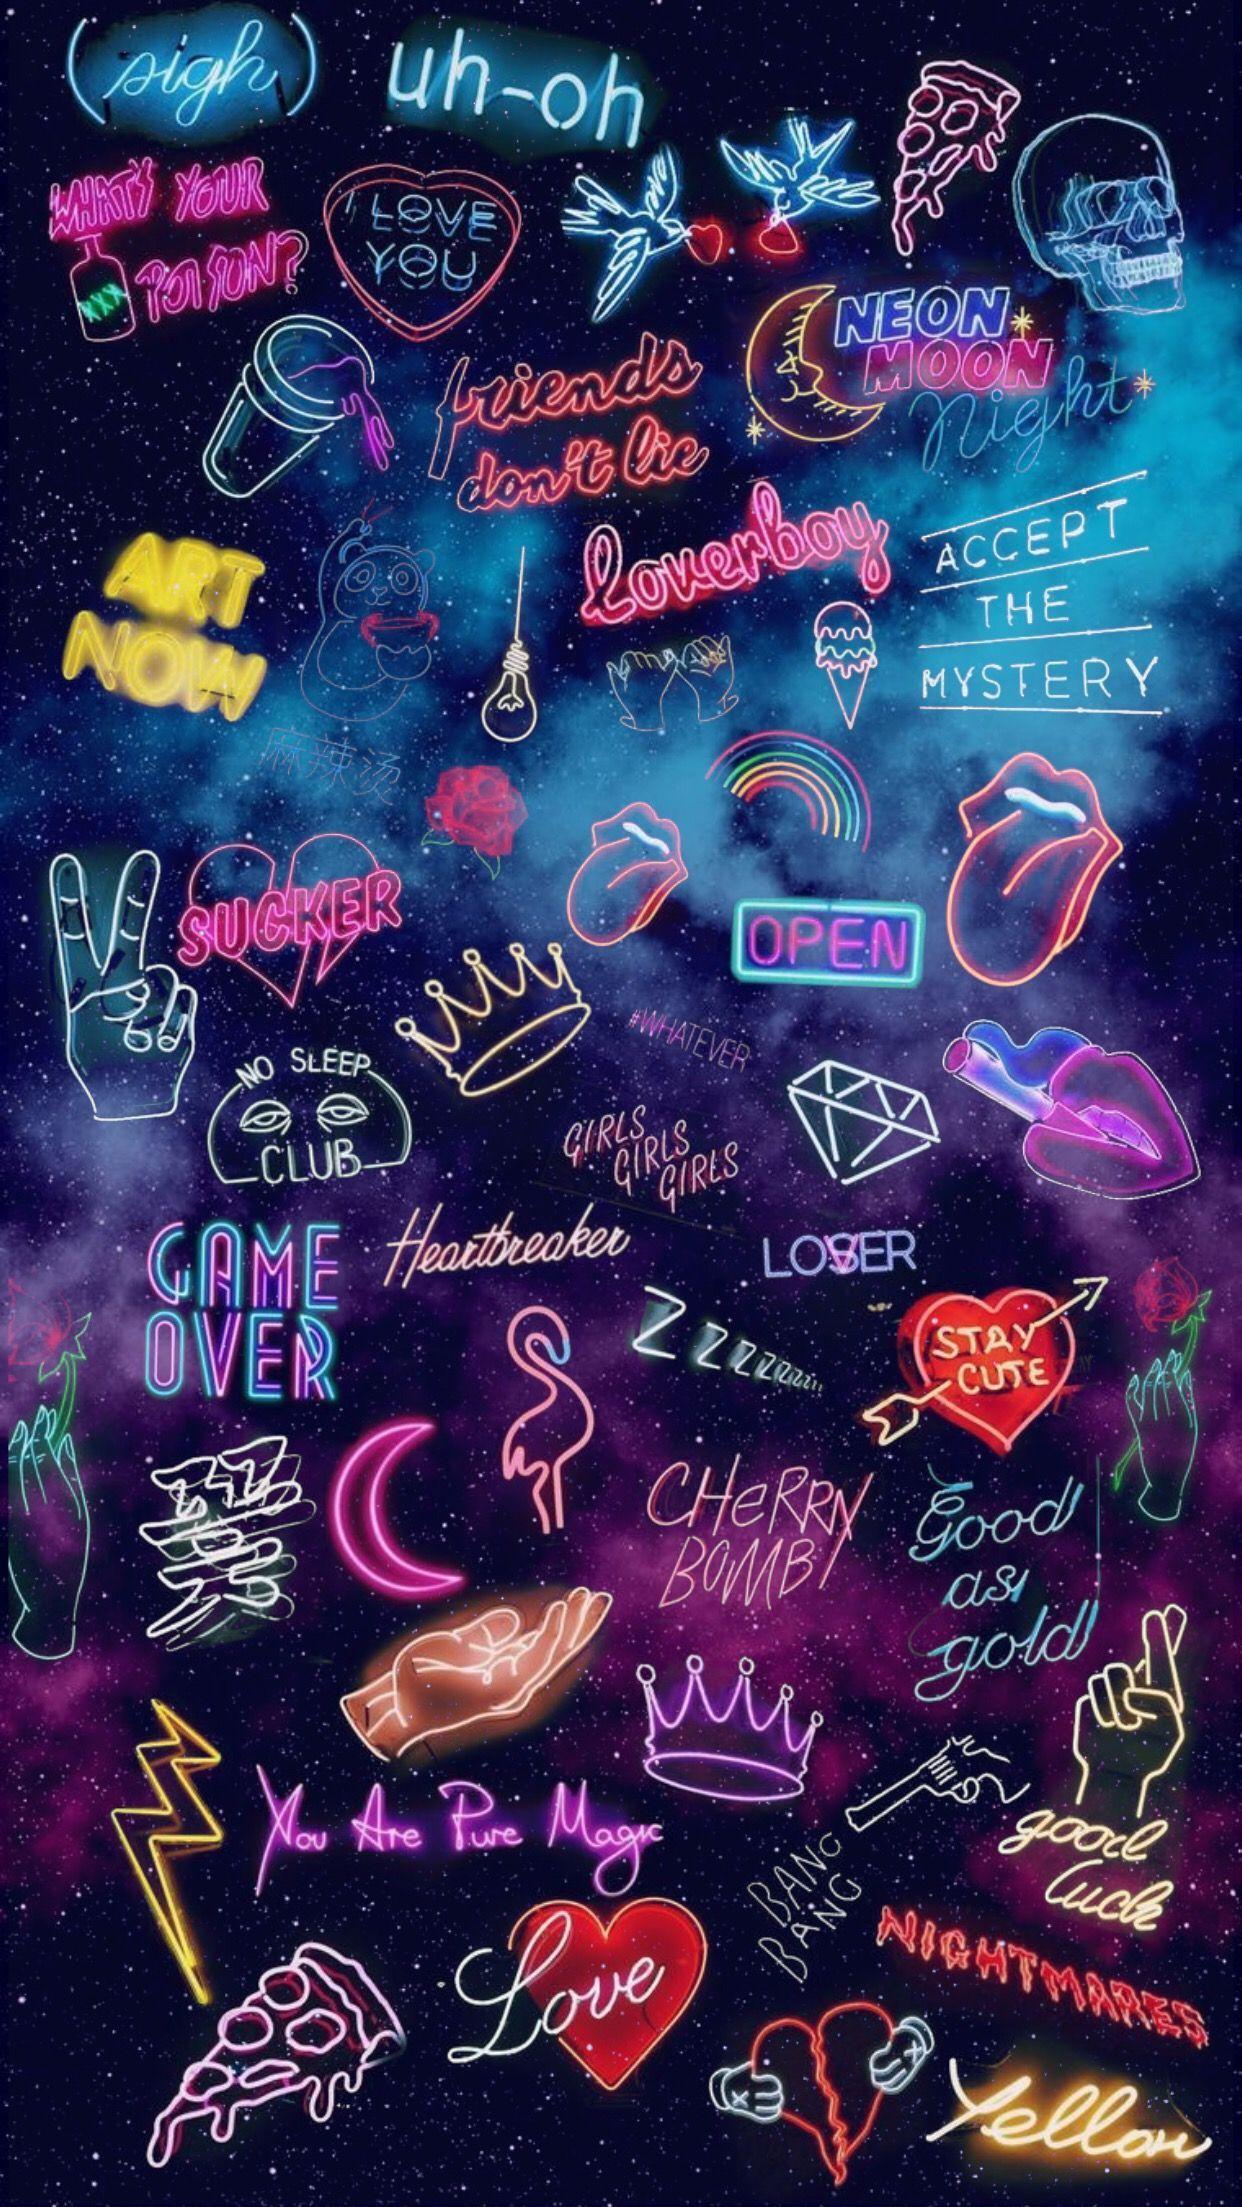 Game over , star cute ,sucker, aesthetic wallpapers